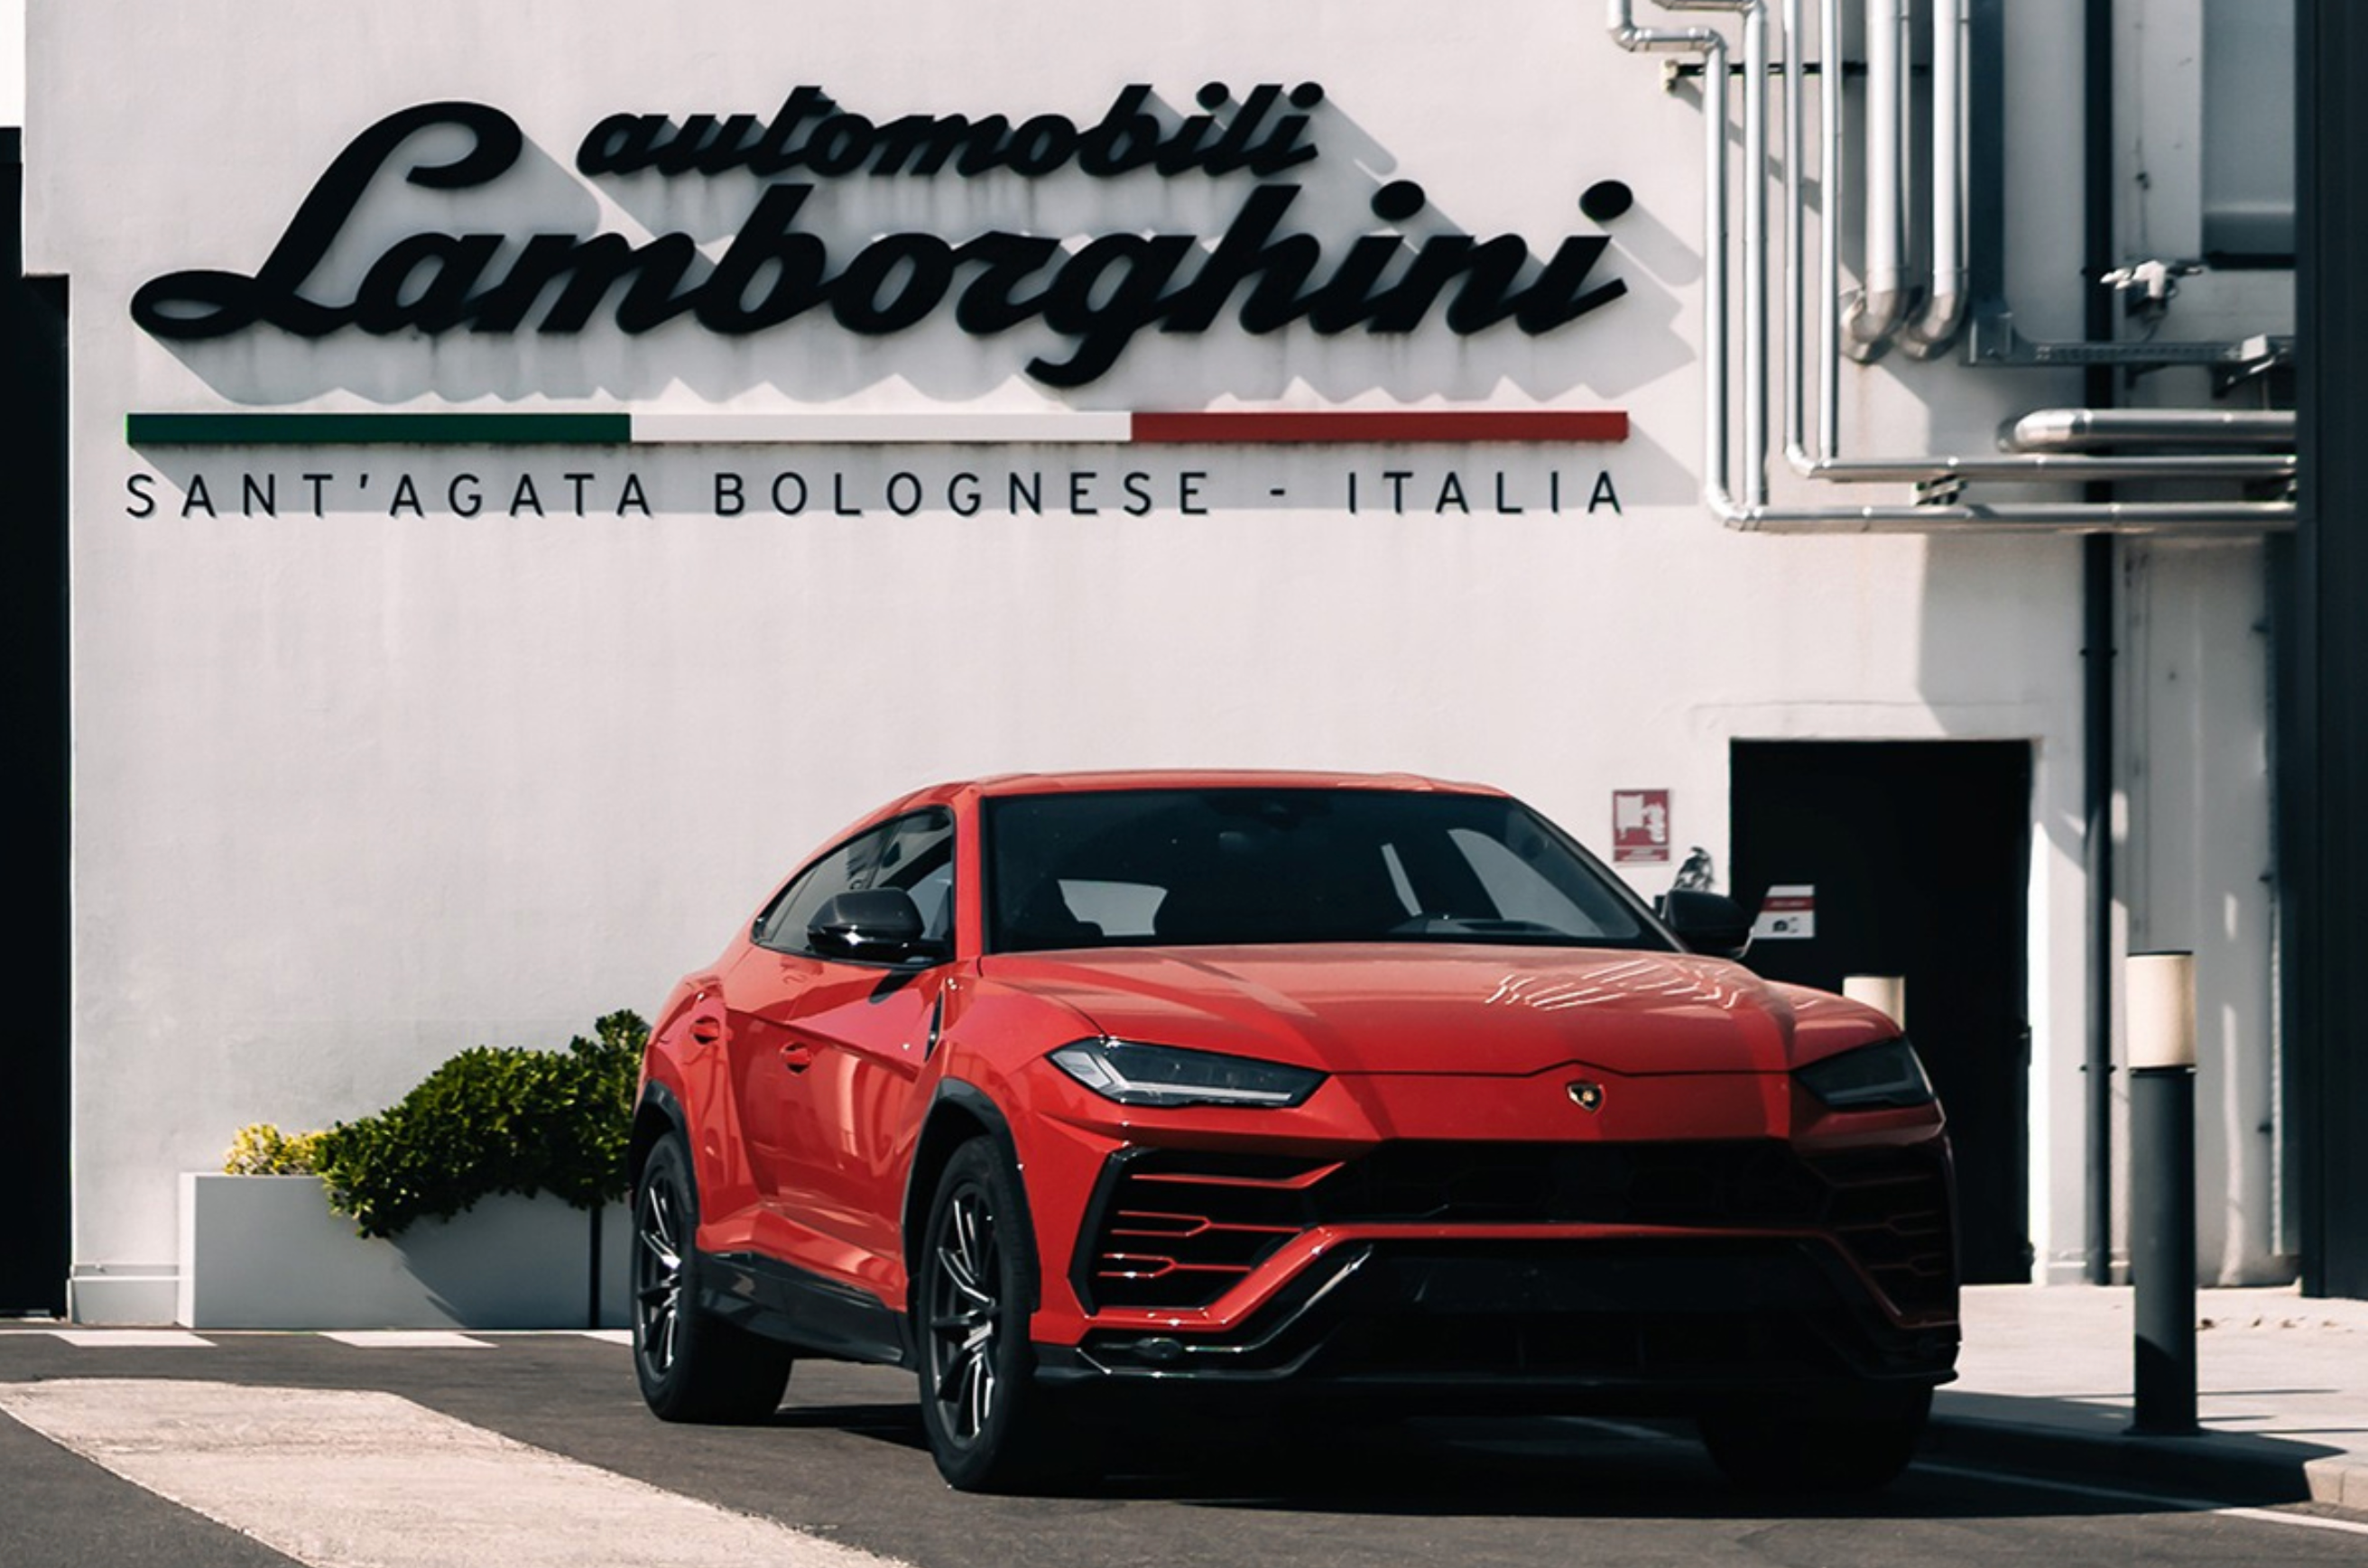 Lamborghini’s Vehicles Are All Sold Out Until 2024 Despite Global Inflation